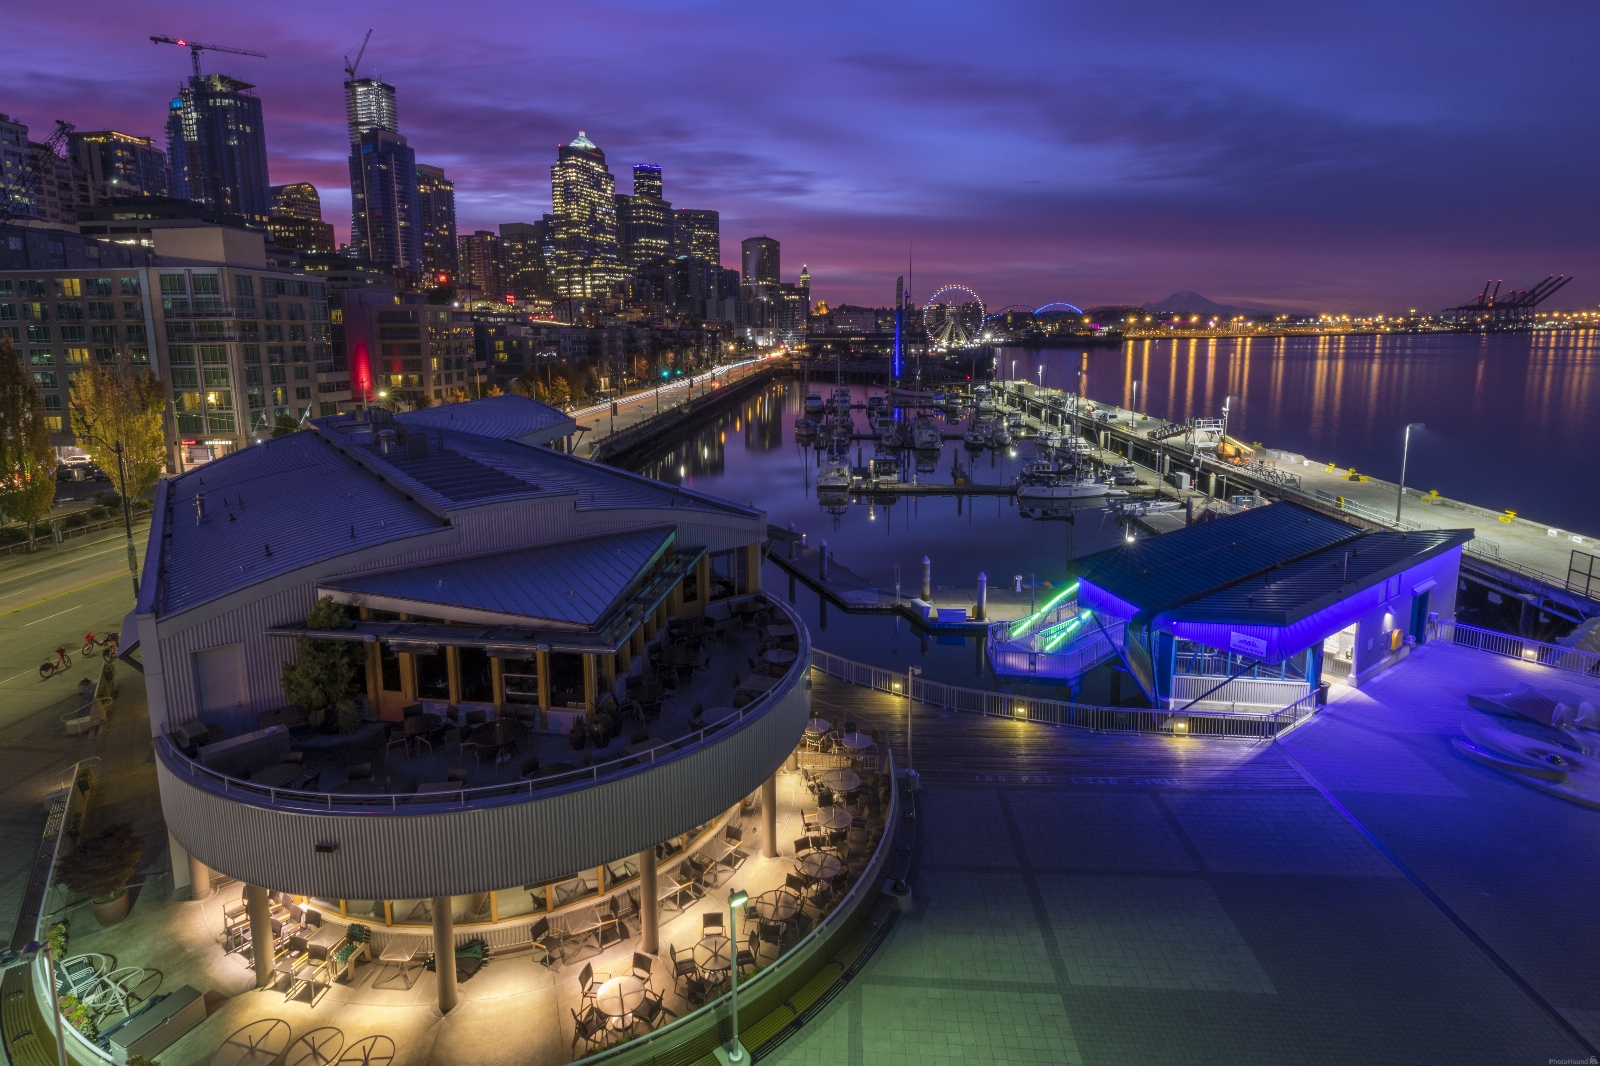 Image of Pier 66, Seattle Waterfront by Enrico Pozzo